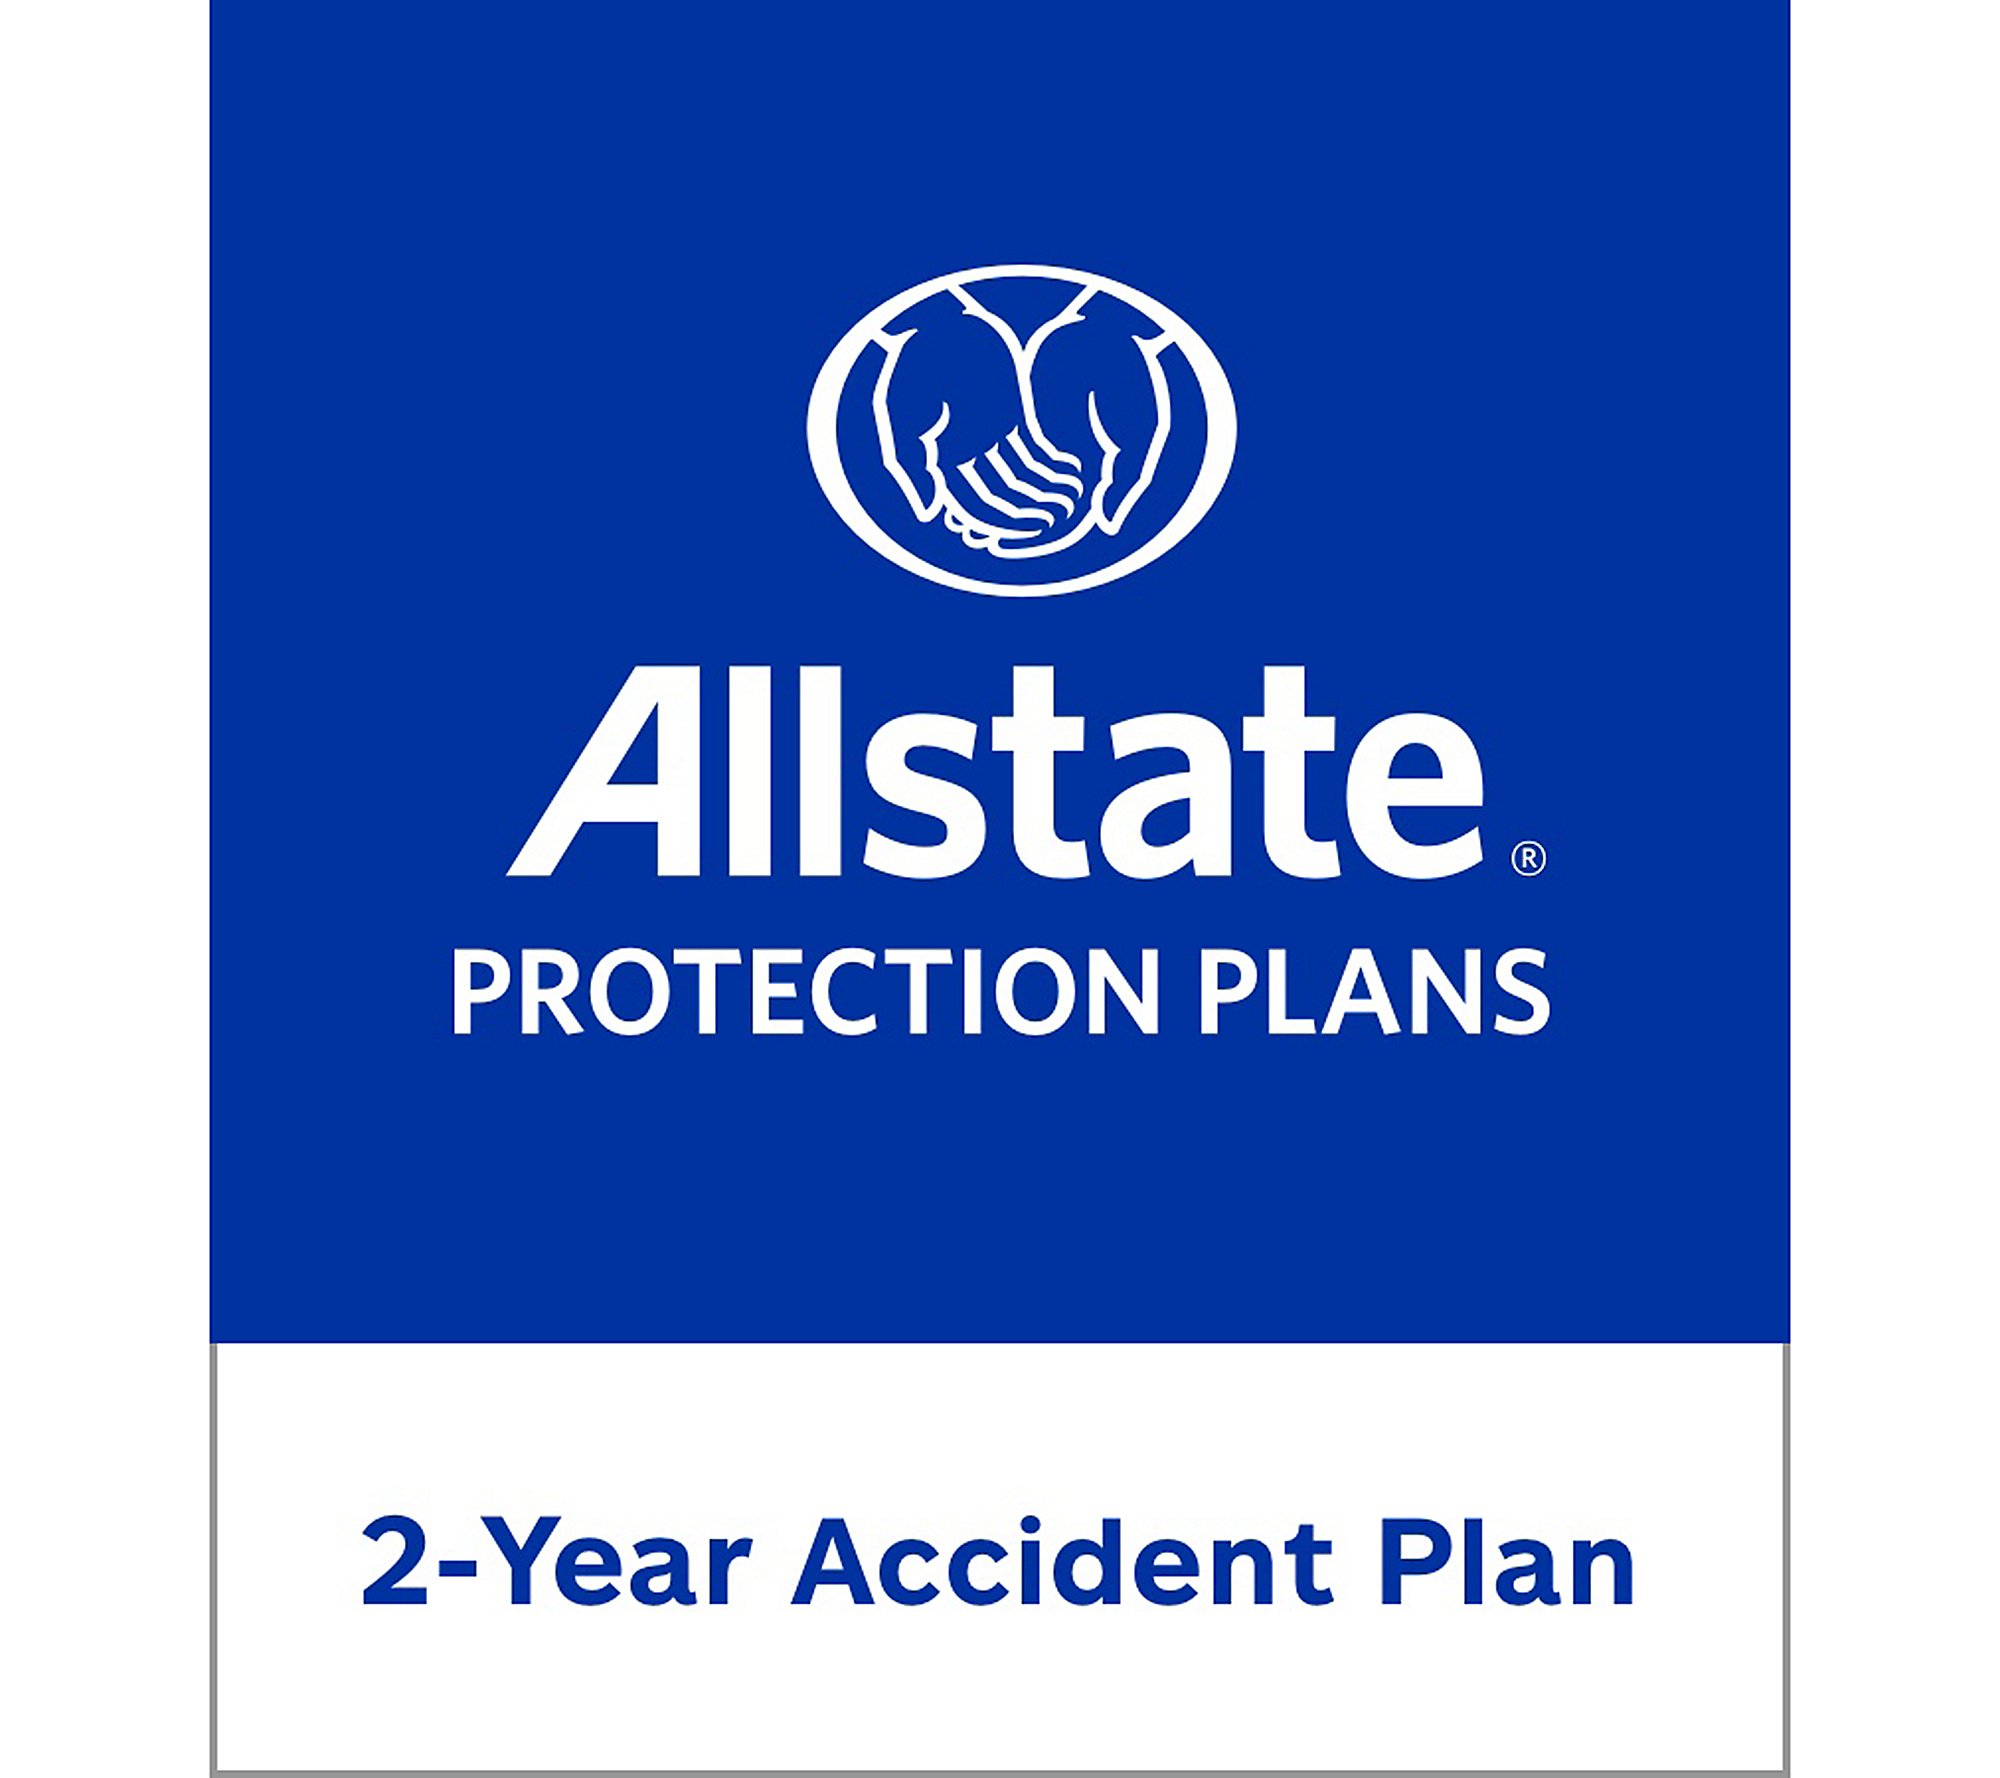 Allstate 2-Year Contract w/ ADH: Audio/Headphon s $900-$1000